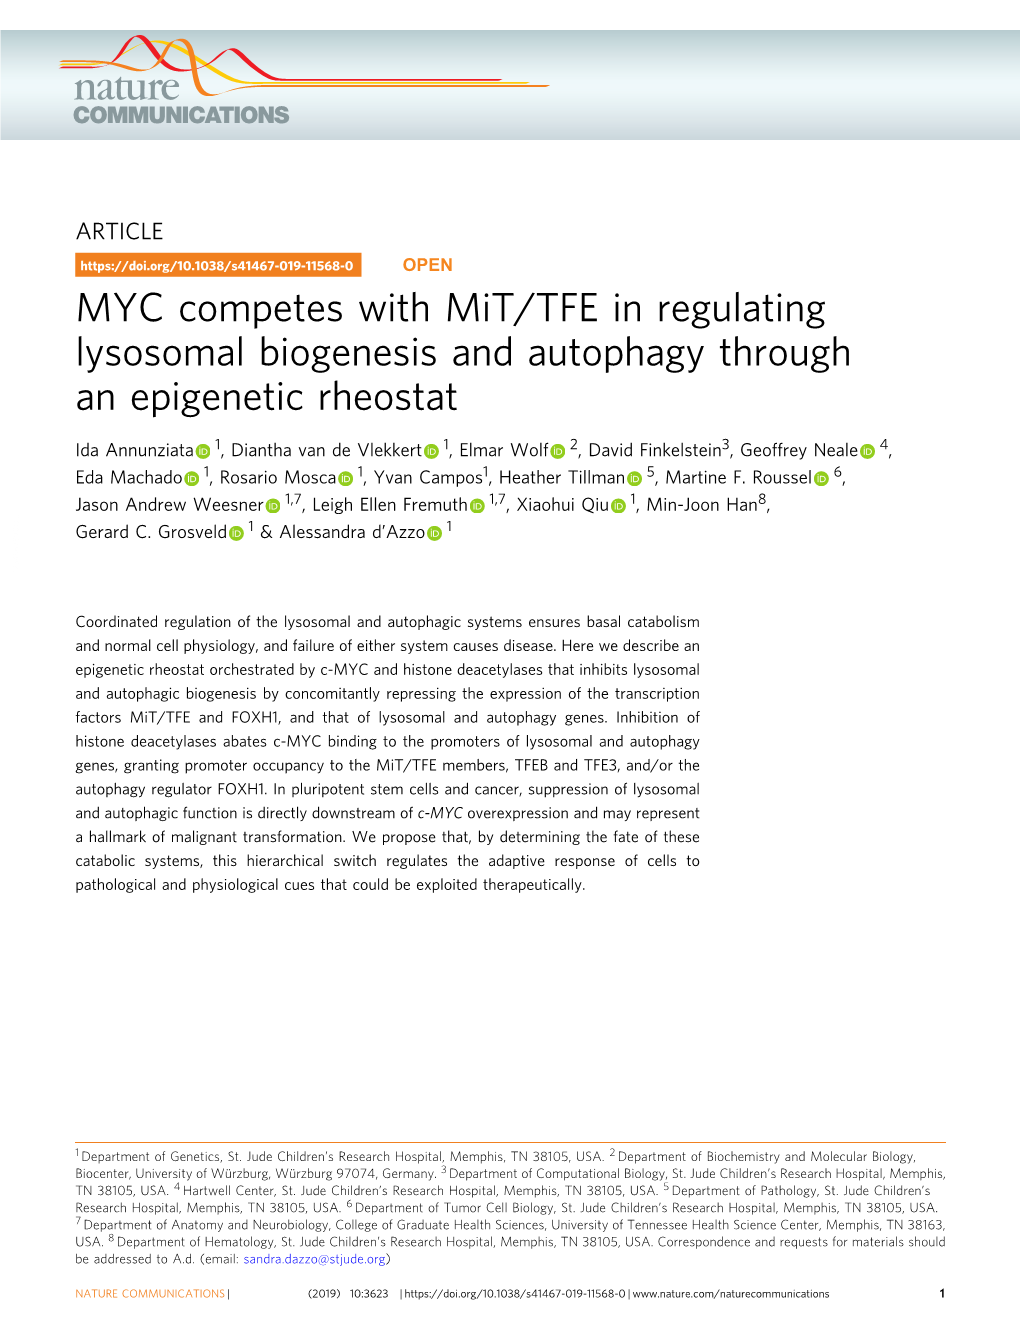 MYC Competes with Mit/TFE in Regulating Lysosomal Biogenesis and Autophagy Through an Epigenetic Rheostat